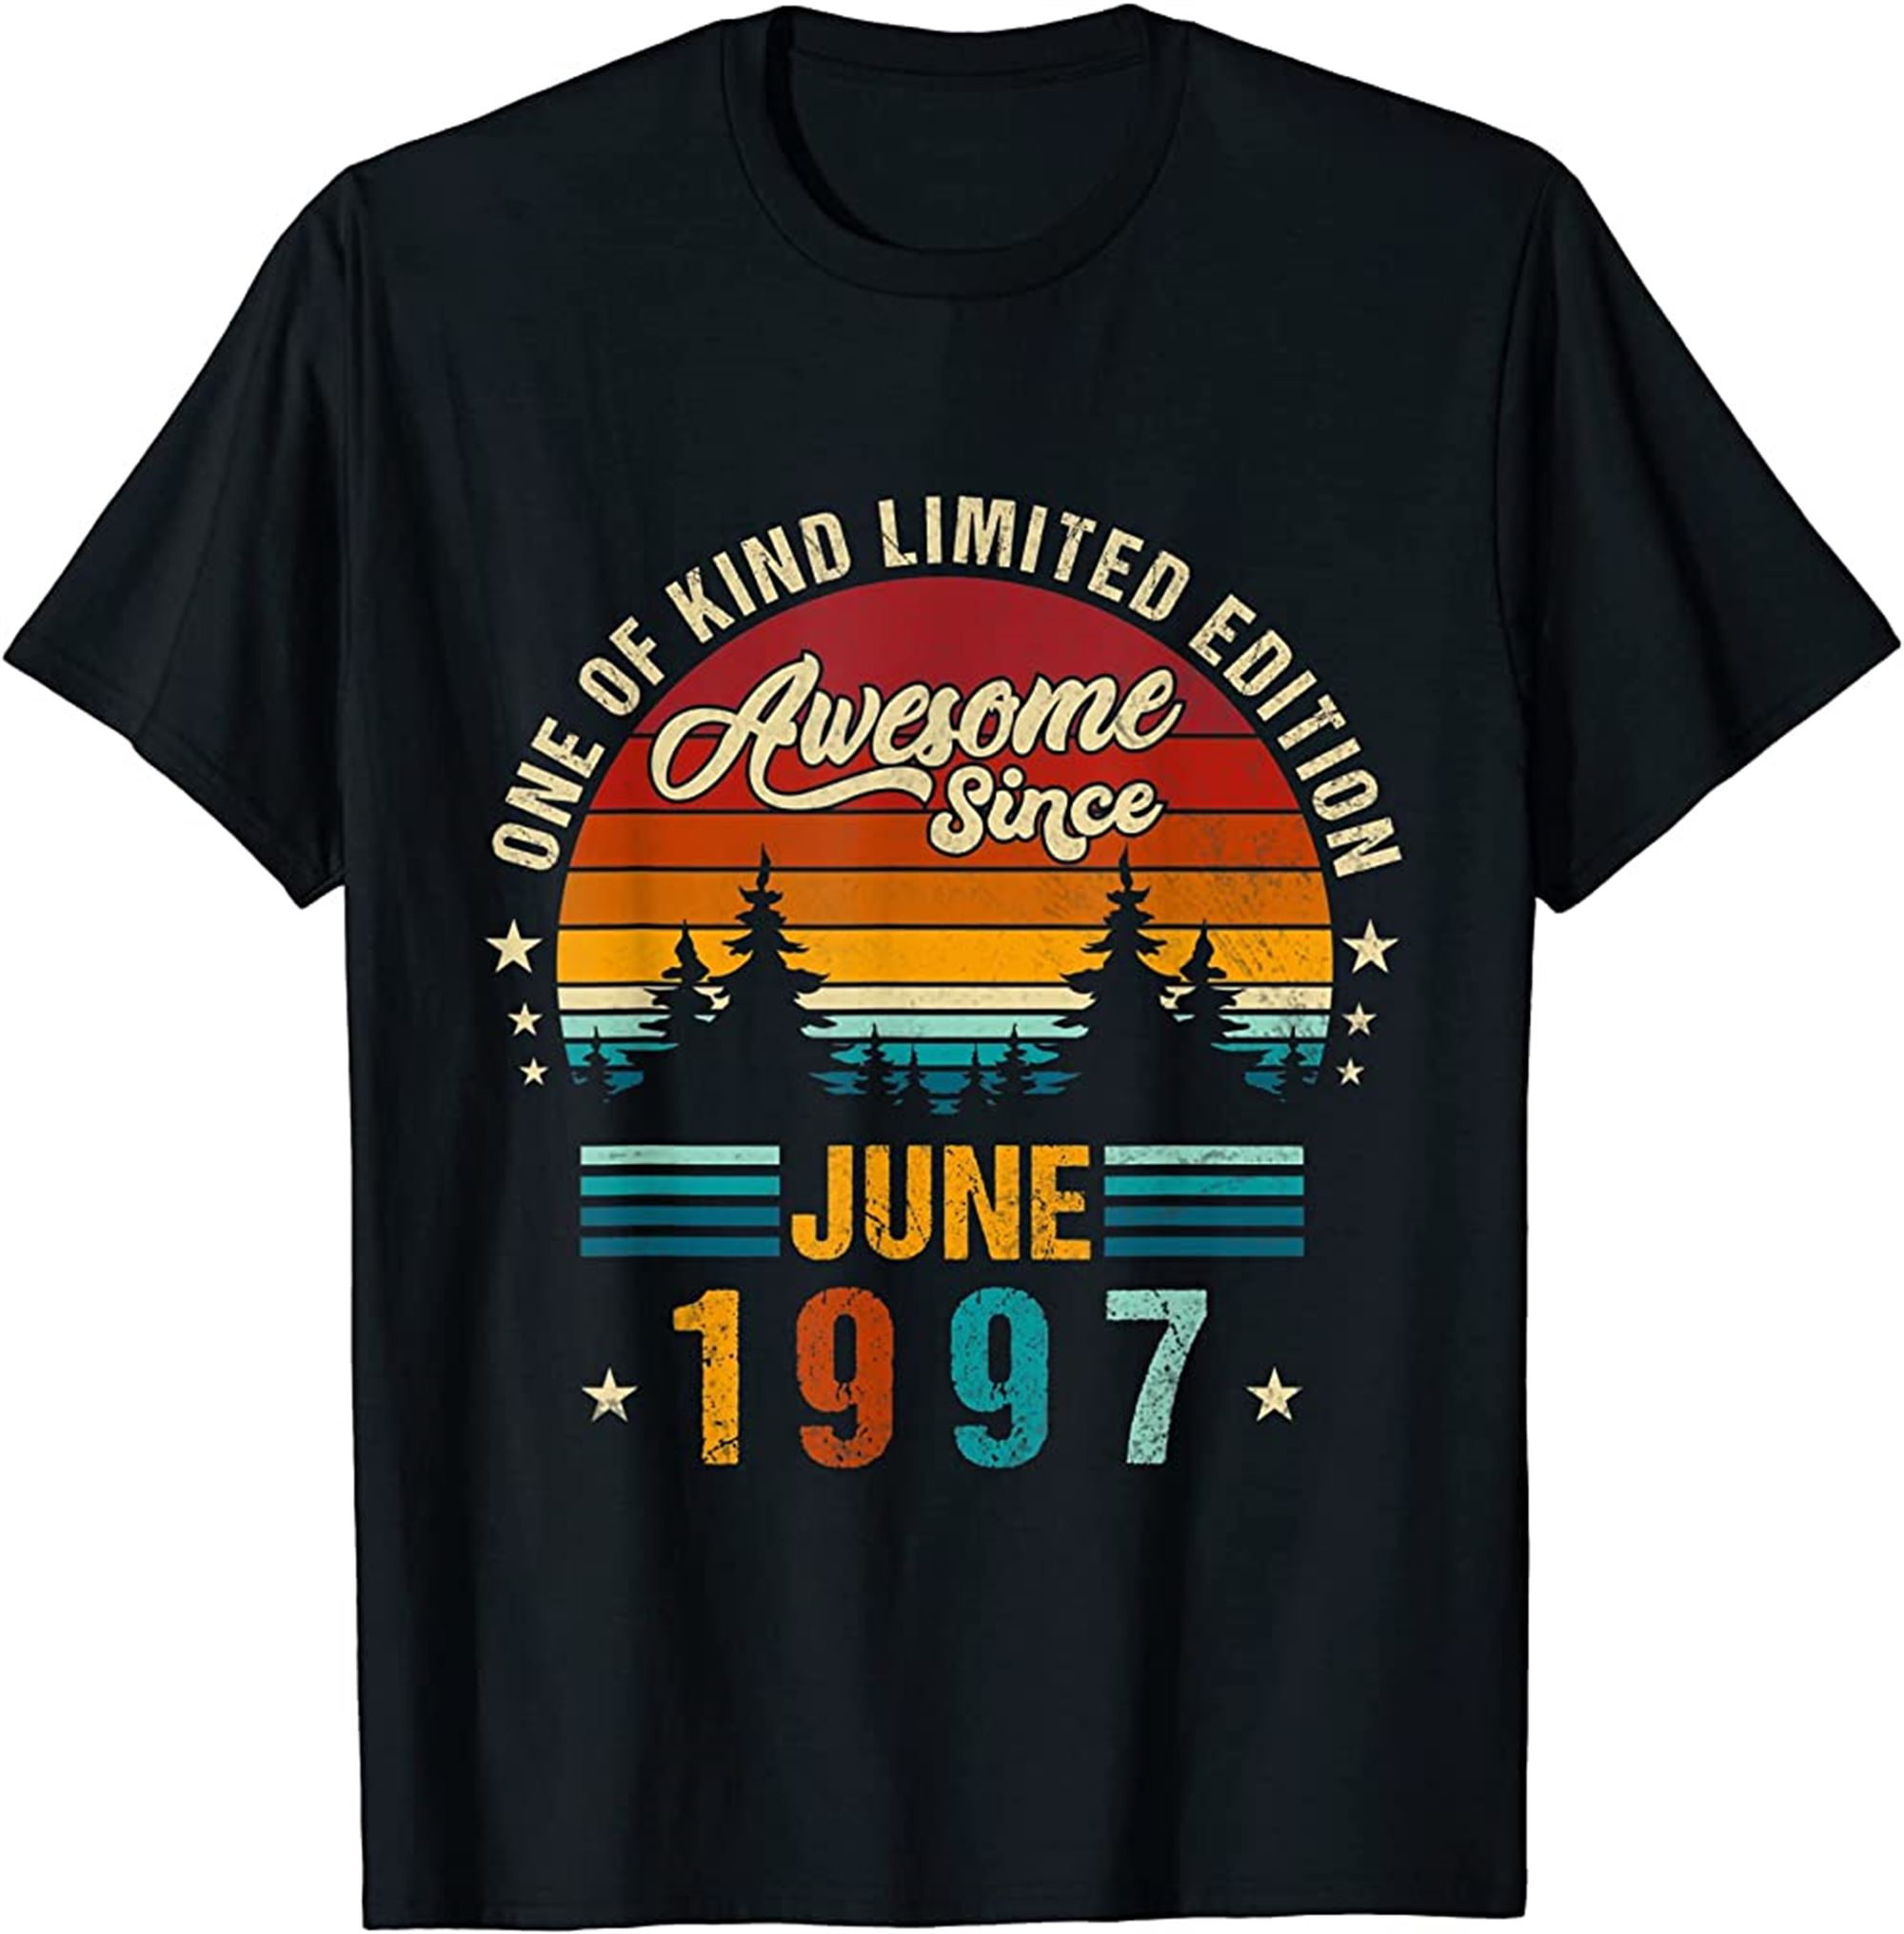 Vintage 25th Birthday Awesome Since June 1997 Epic Legend T-shirt Size Up To 5xl